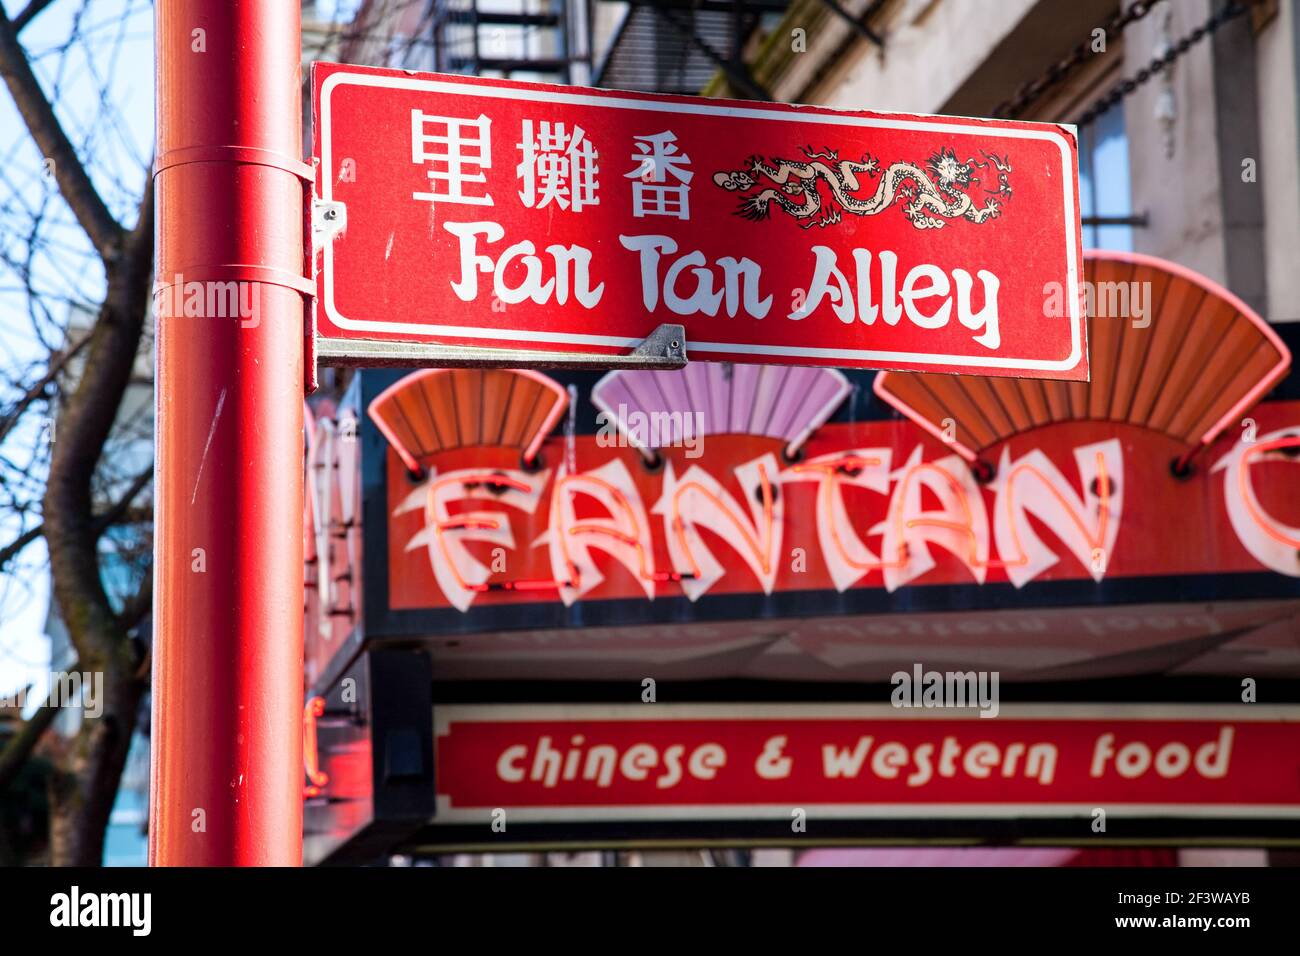 sign pointing to Fan Tan Alley, Chinatown, Victoria, Vancouver Island, British Columbia Stock Photo